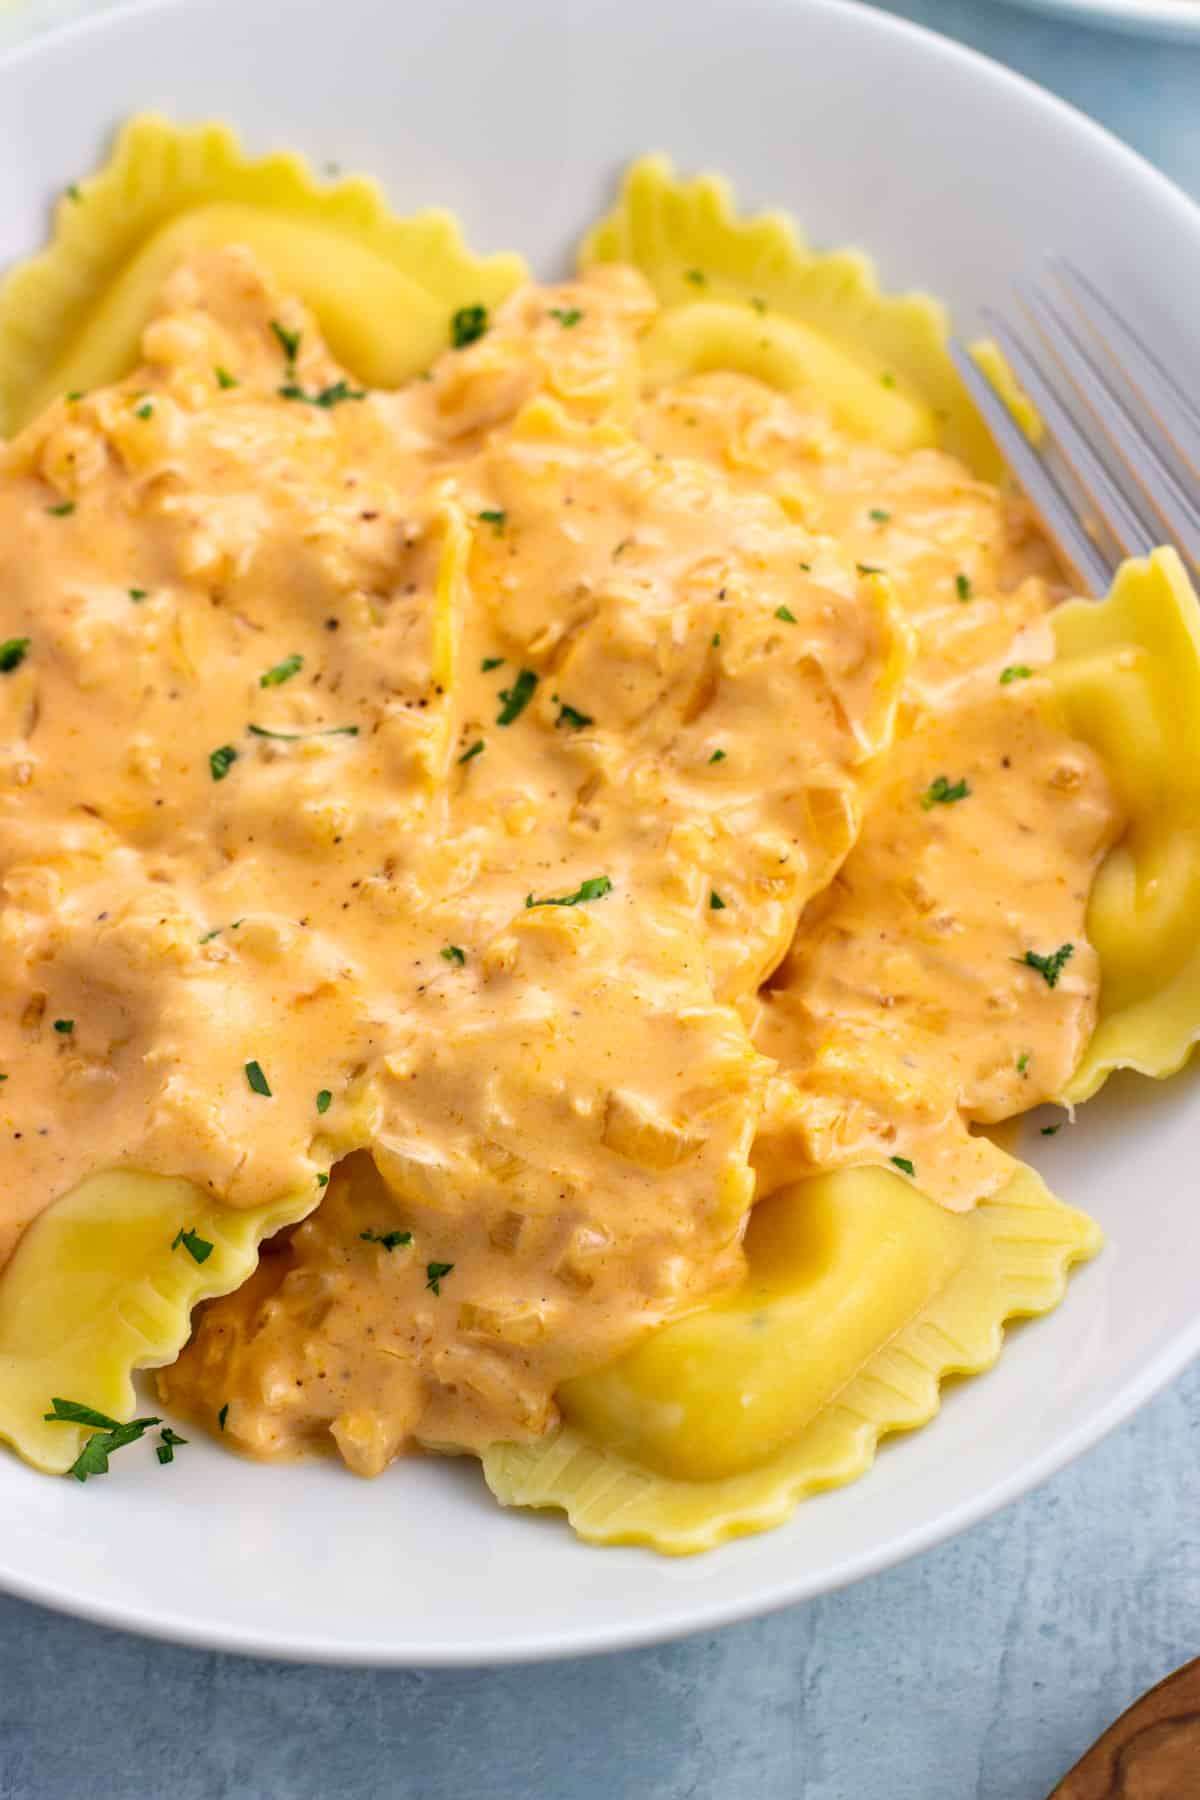 Lobster ravioli topped with a light cream sauce.